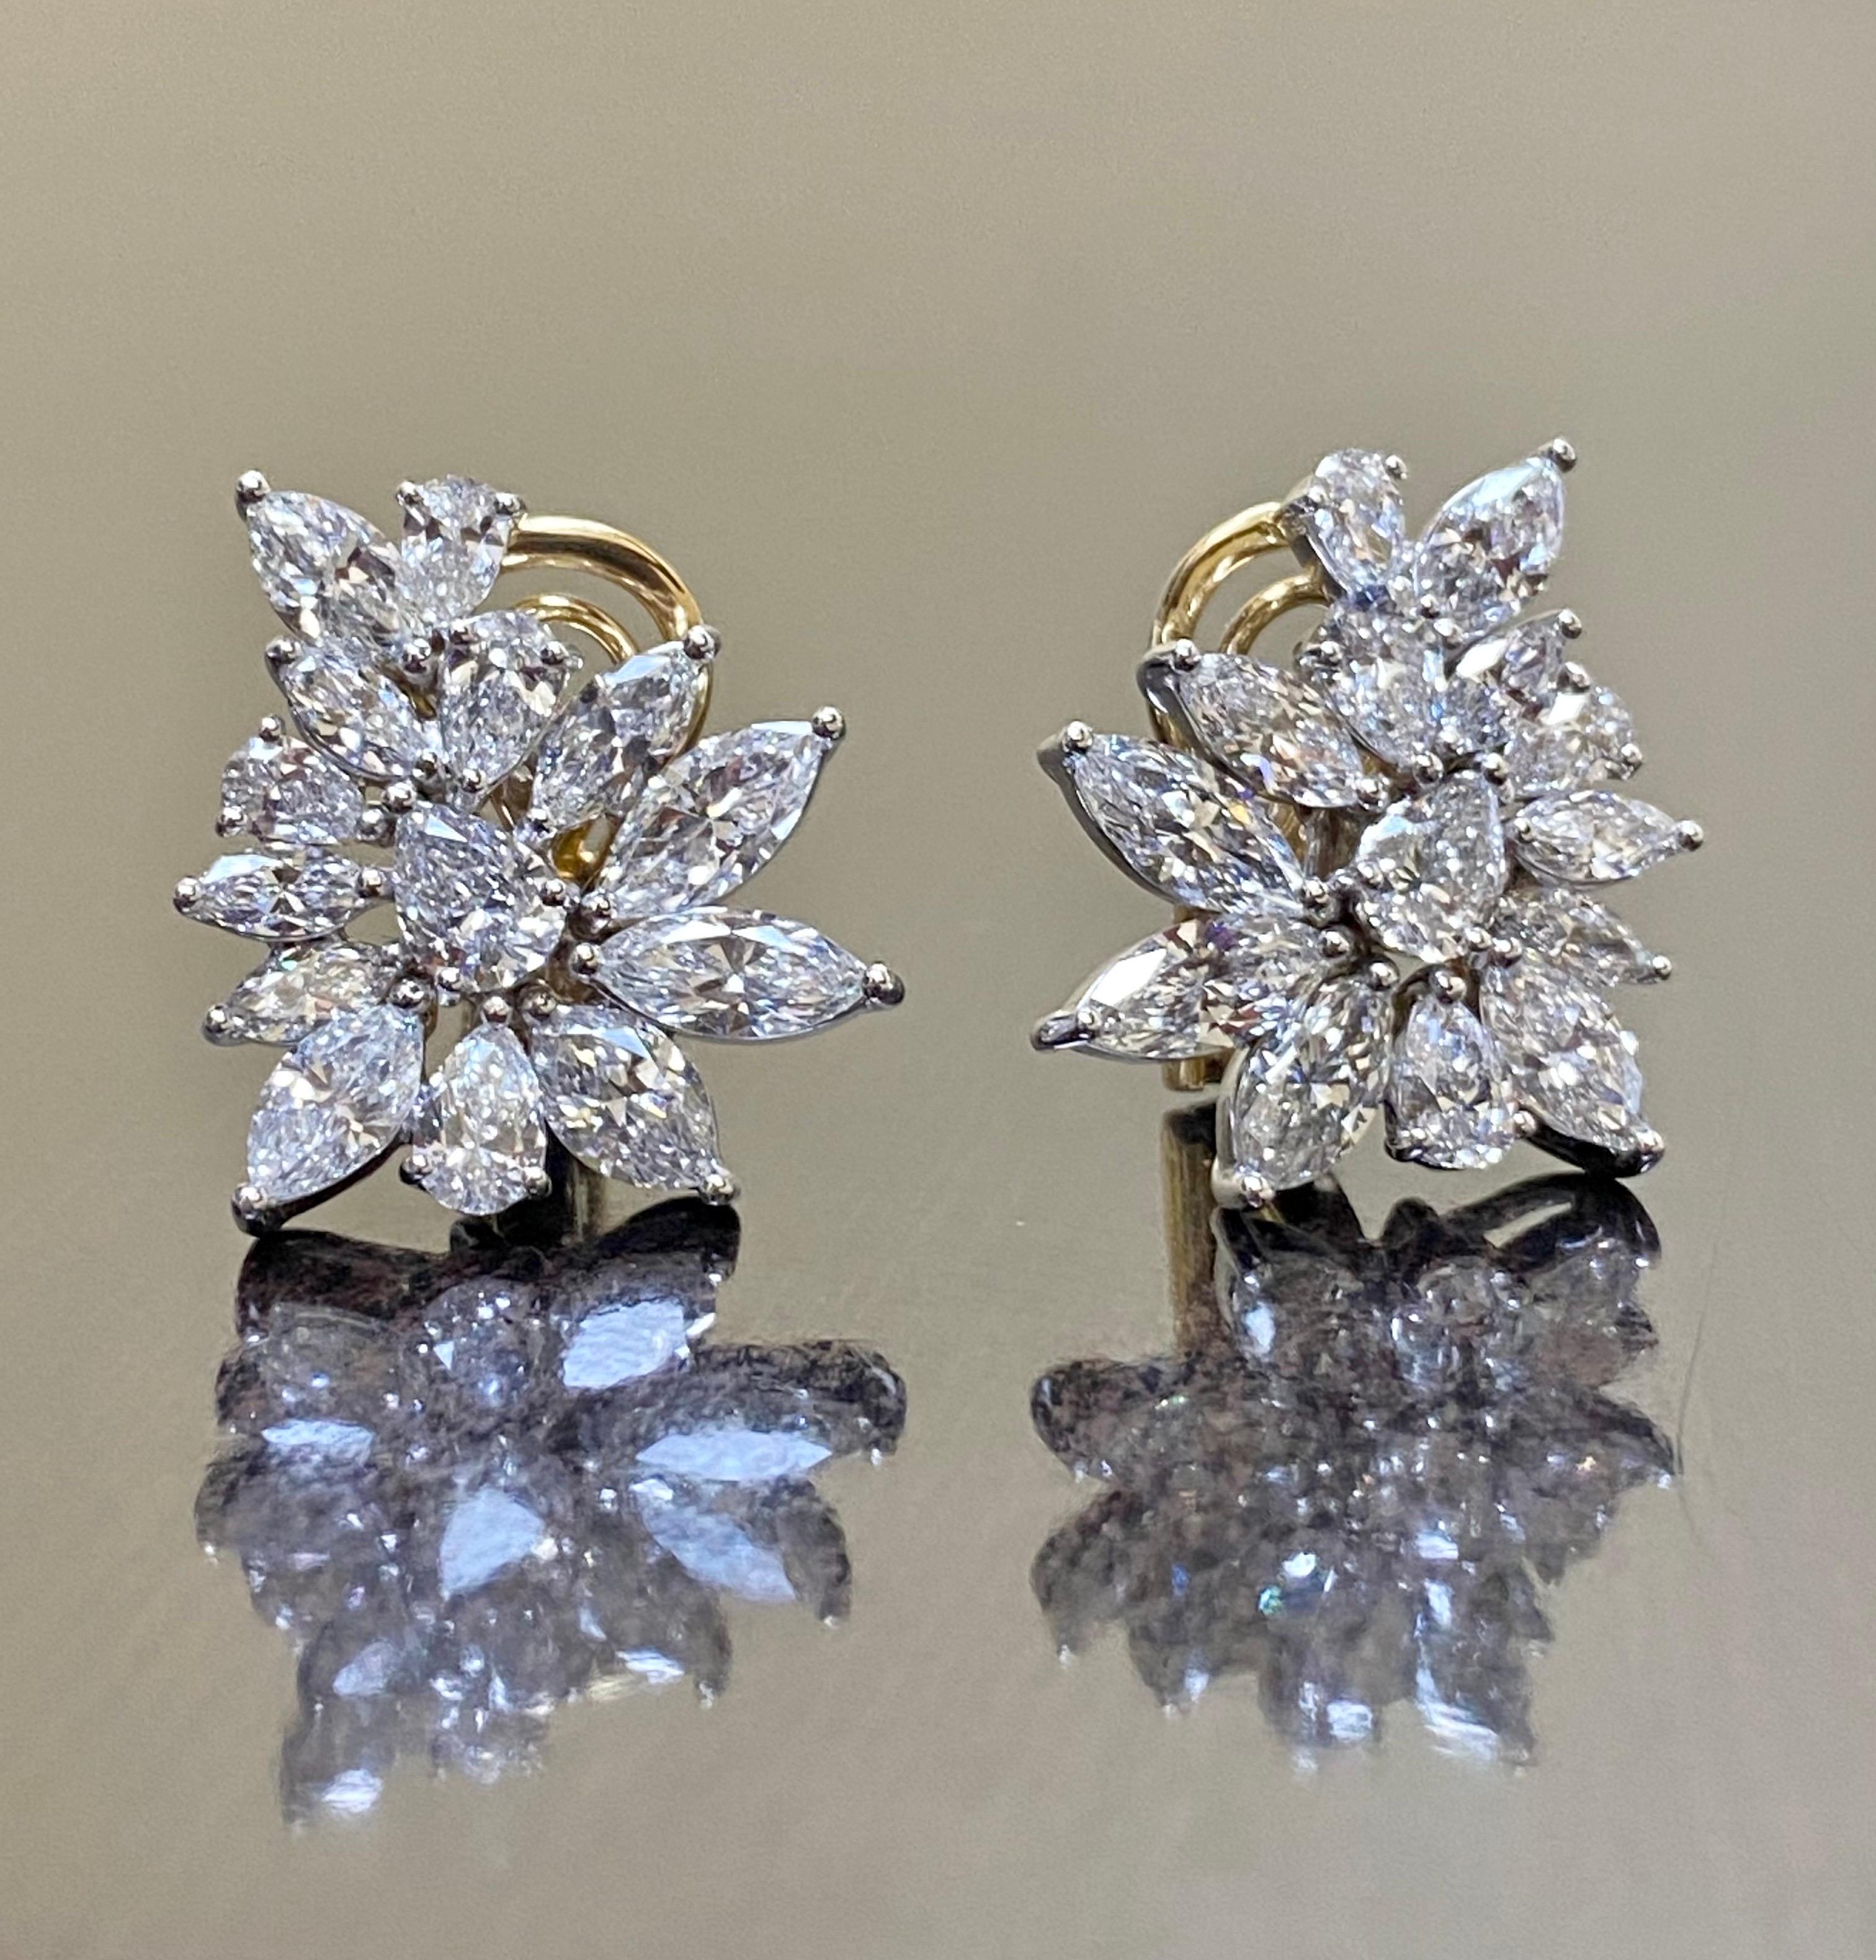 Handmade 18K White Gold 9 Carat Marquise and Pear Shape Diamond Earrings For Sale 1